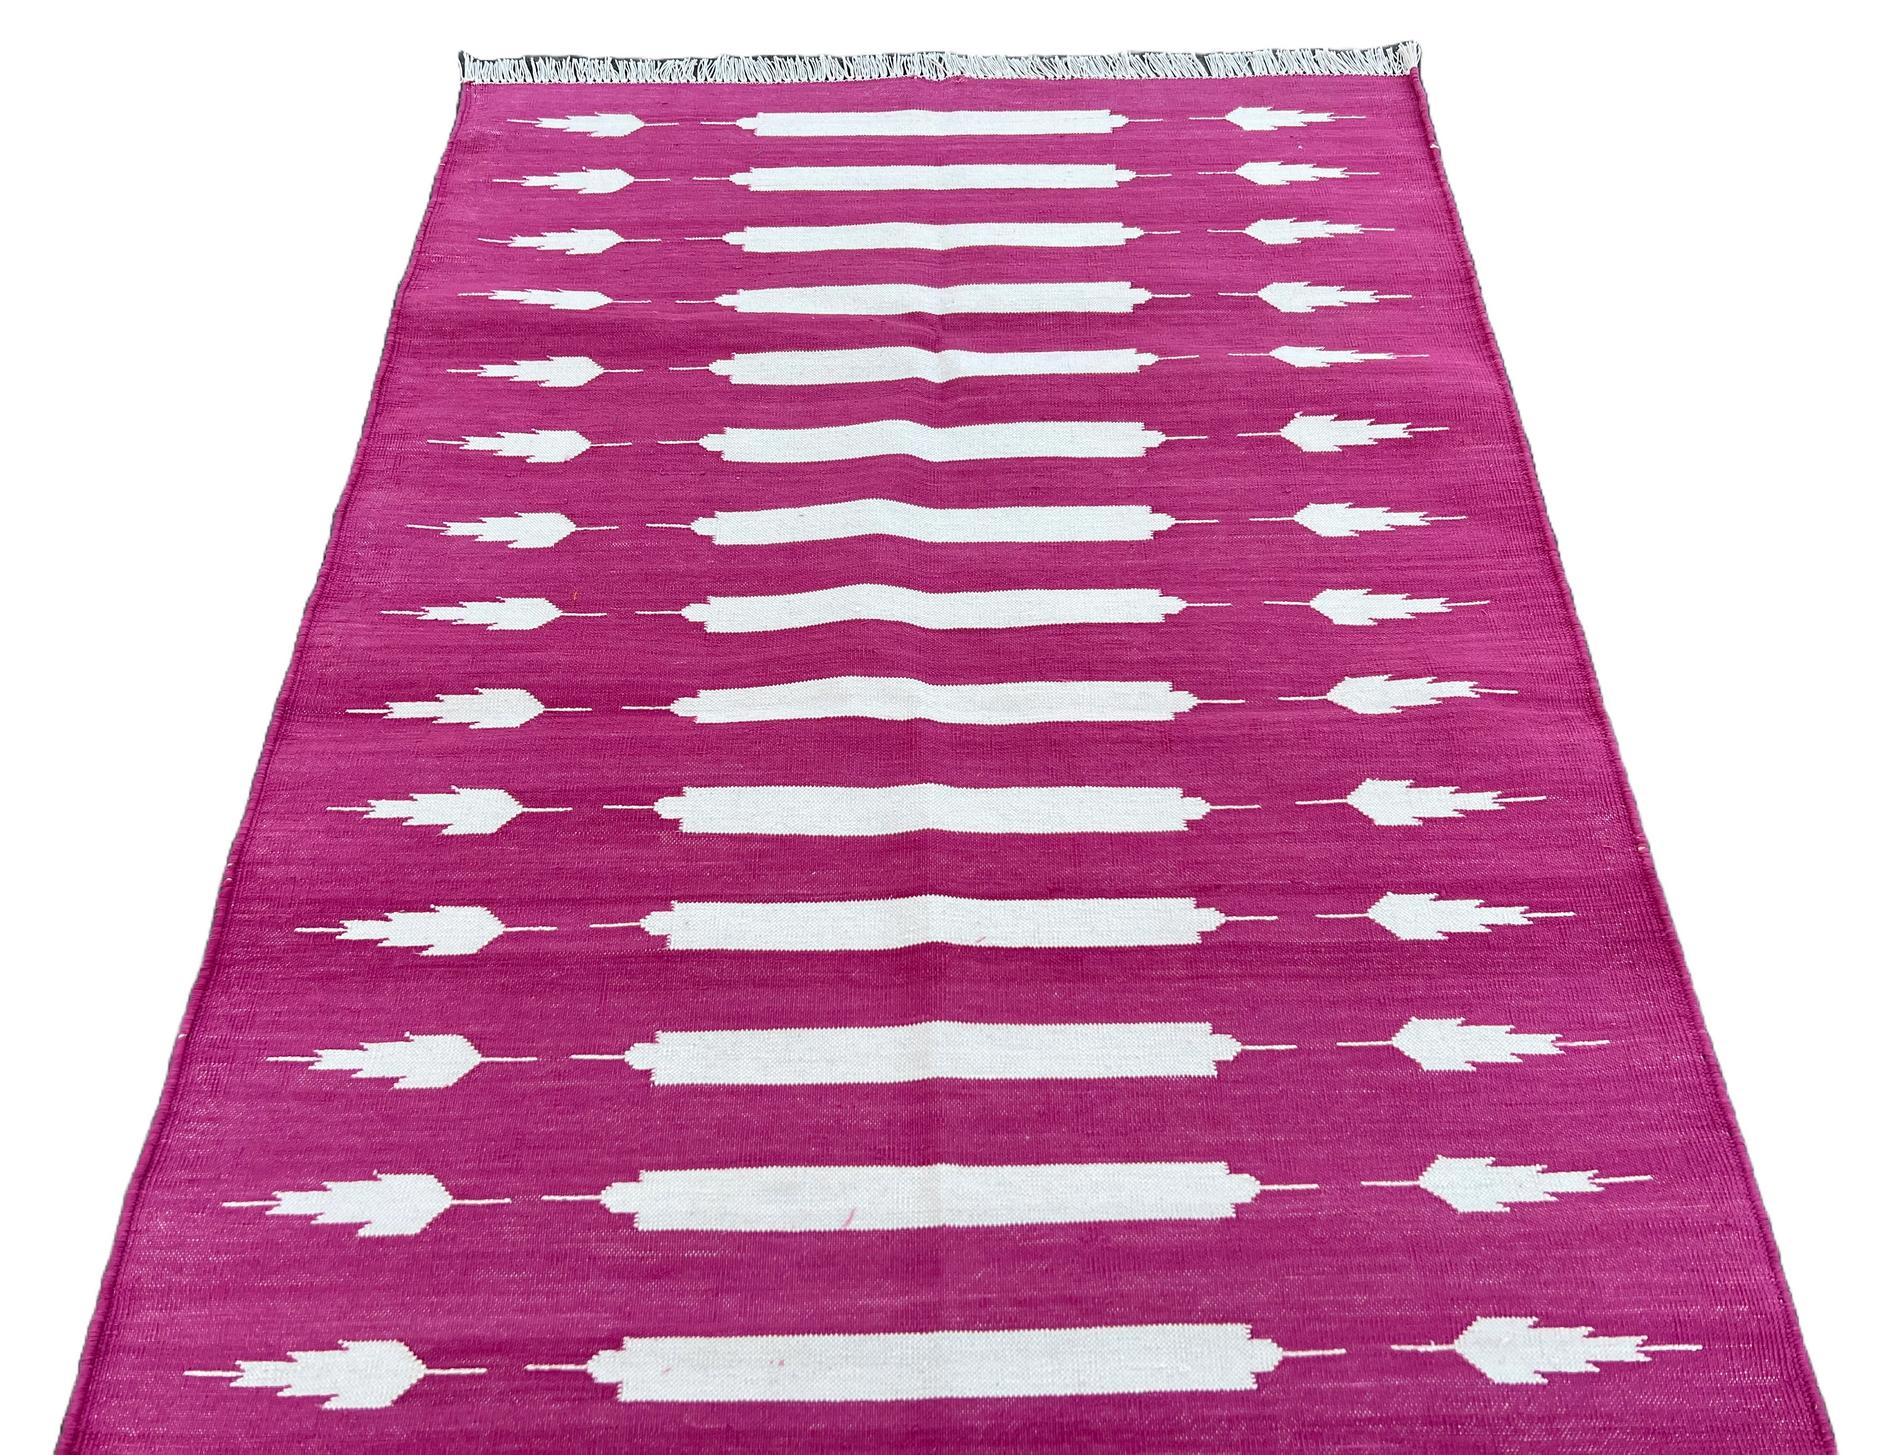 Handmade Cotton Area Flat Weave Rug, 3x5 Pink And White Striped Indian Dhurrie For Sale 1